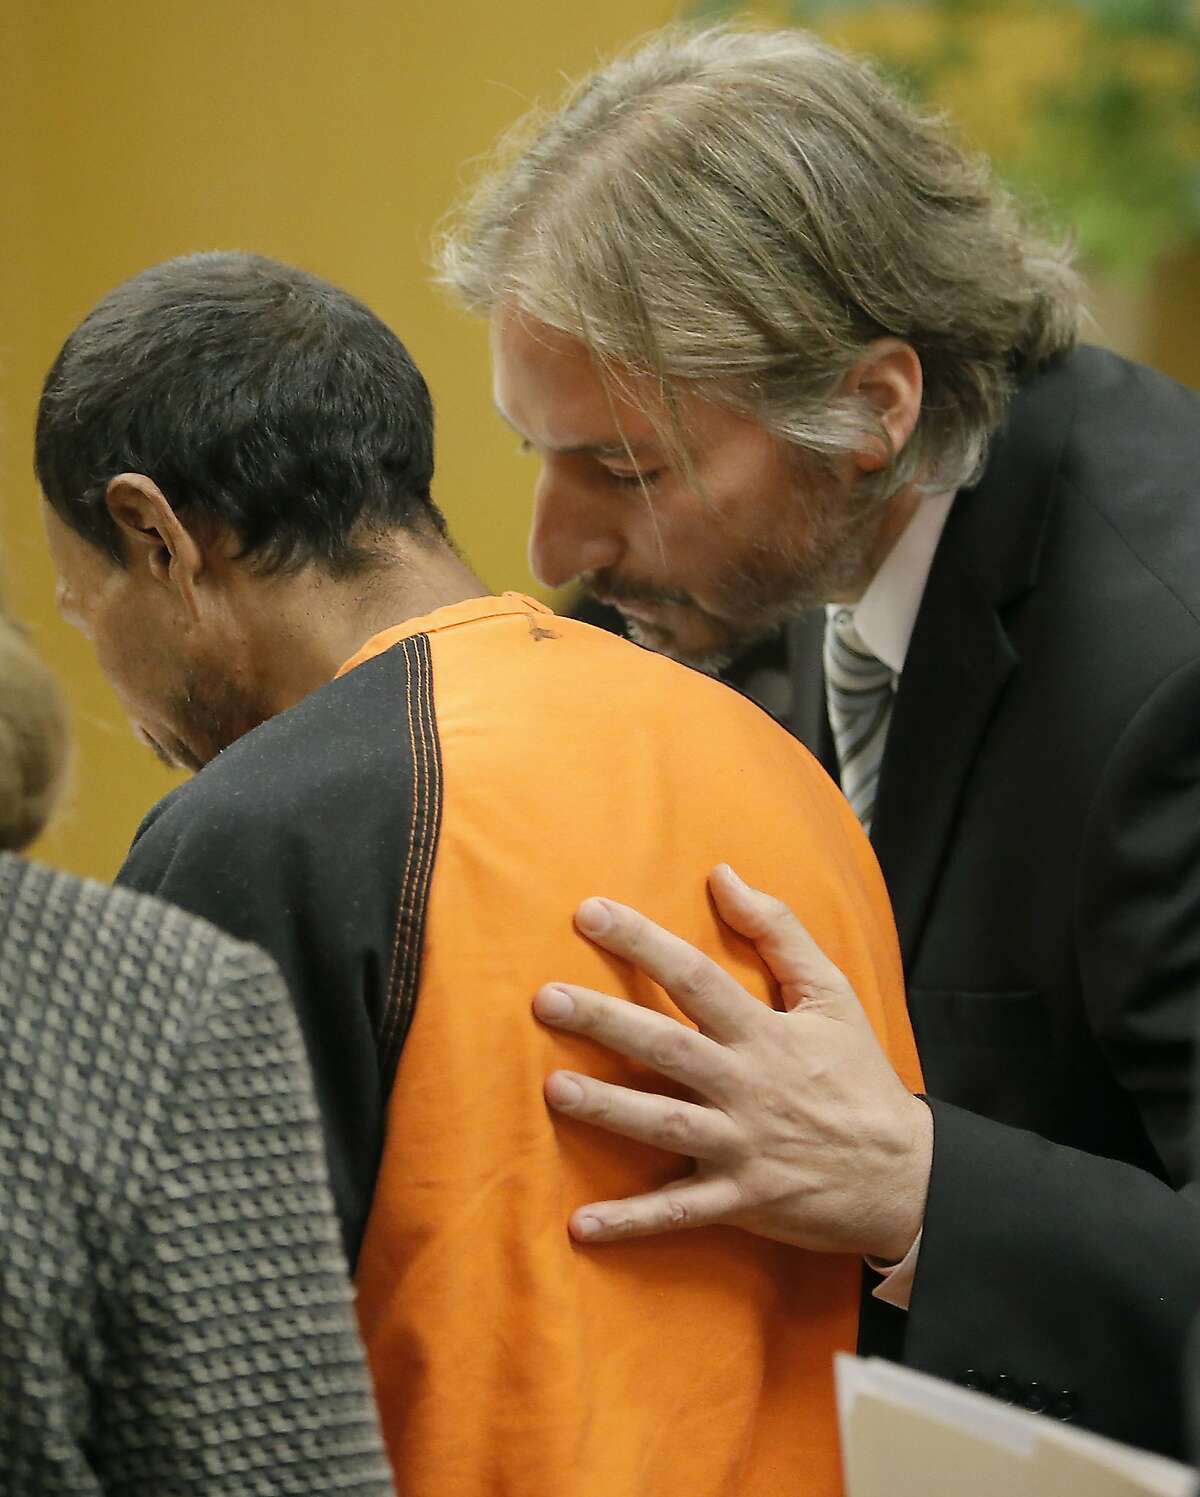 Francisco Sanchez stands in court with his attorney Matt Gonzalez, right, and pleads not guilty to homicide during his arraignment at the Hall of Justice on Tuesday, July 7, 2015, in San Francisco. Prosecutors have charged the Mexican immigrant with murder in the waterfront shooting death of 32-year-old Kathryn Steinle. (Michael Macor/San Francisco Chronicle via AP, Pool)